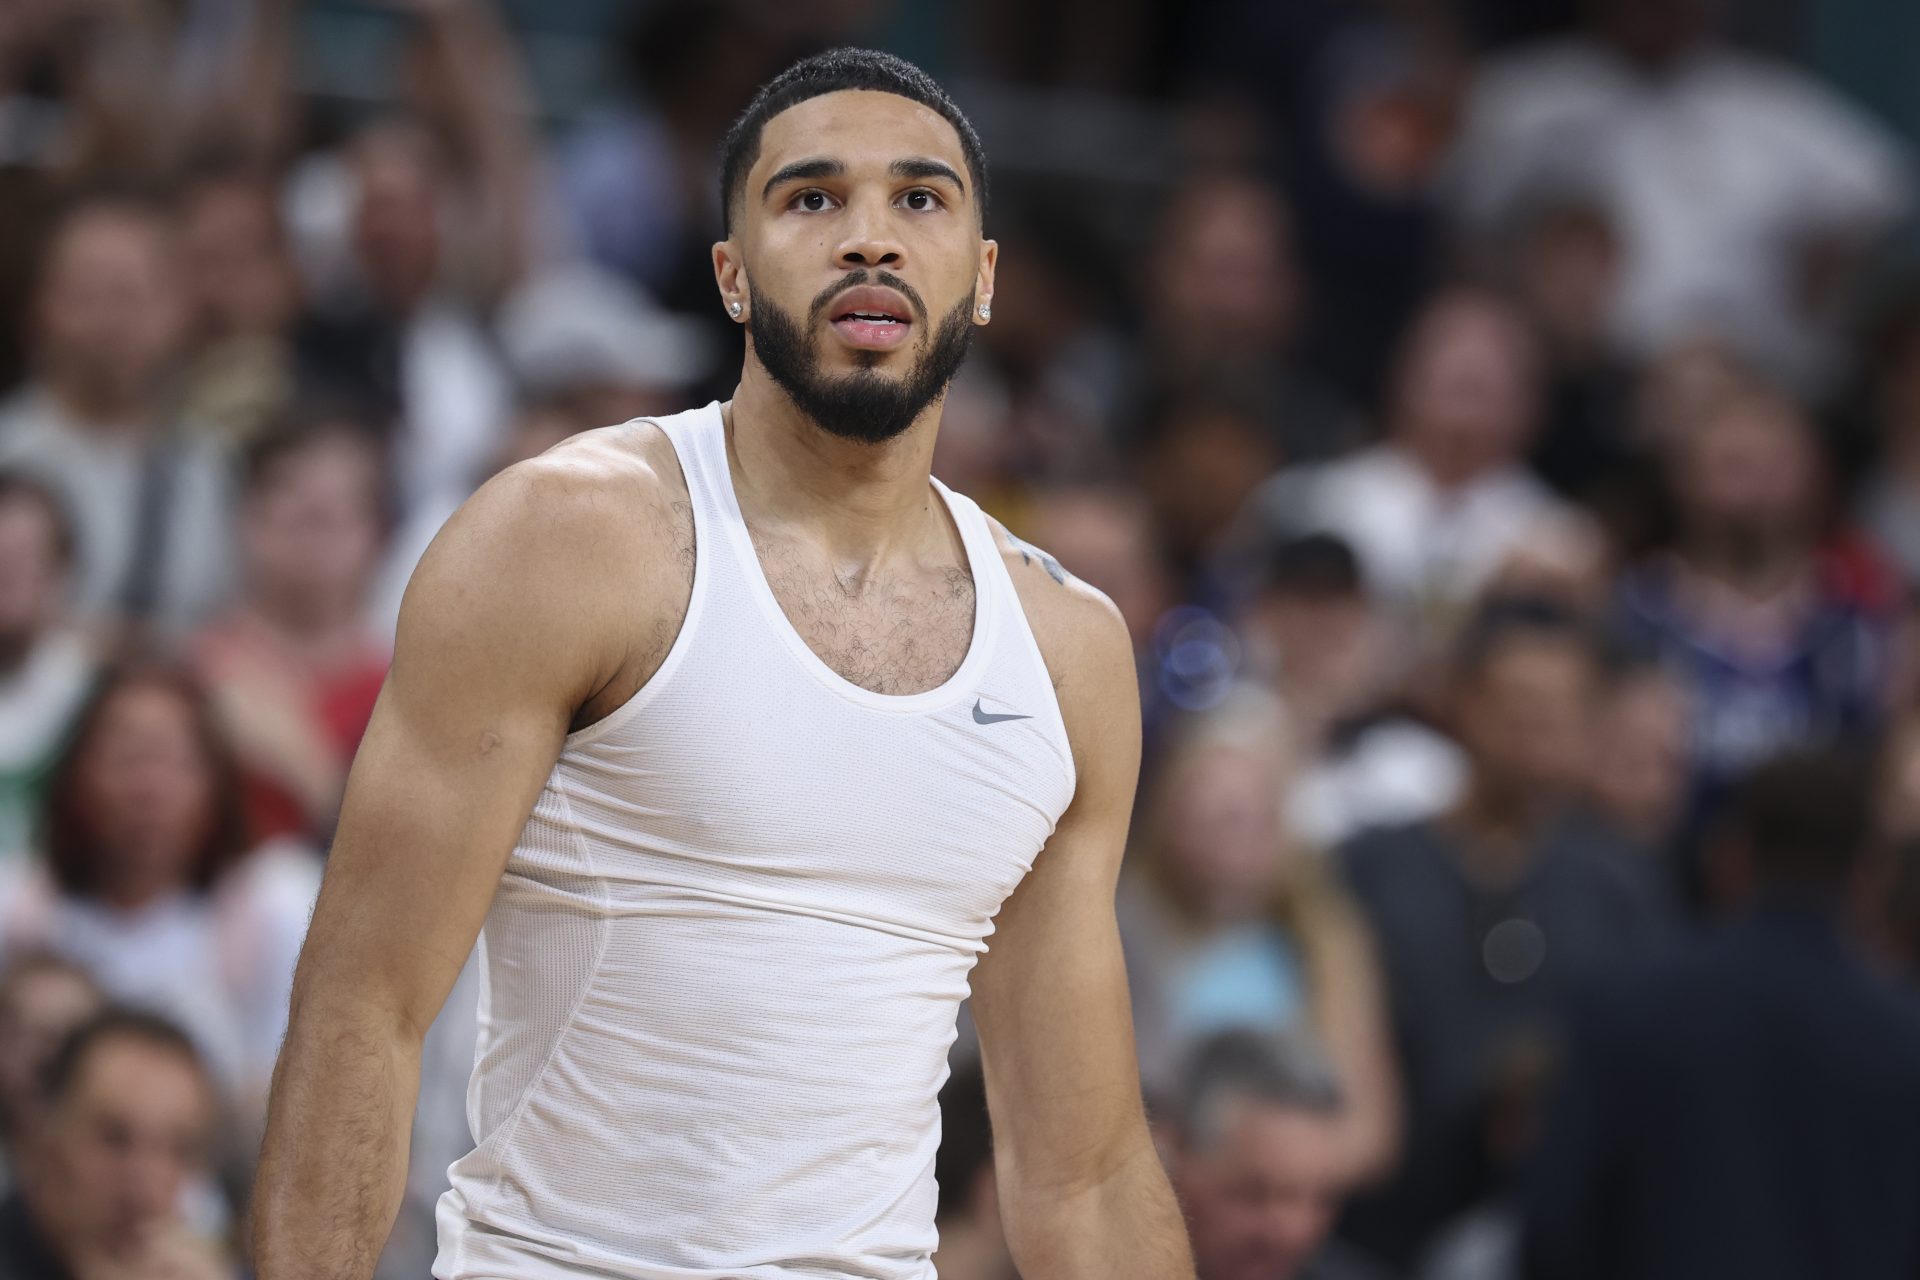 Was Steve Kerr wise for benching Jayson Tatum against Serbia?